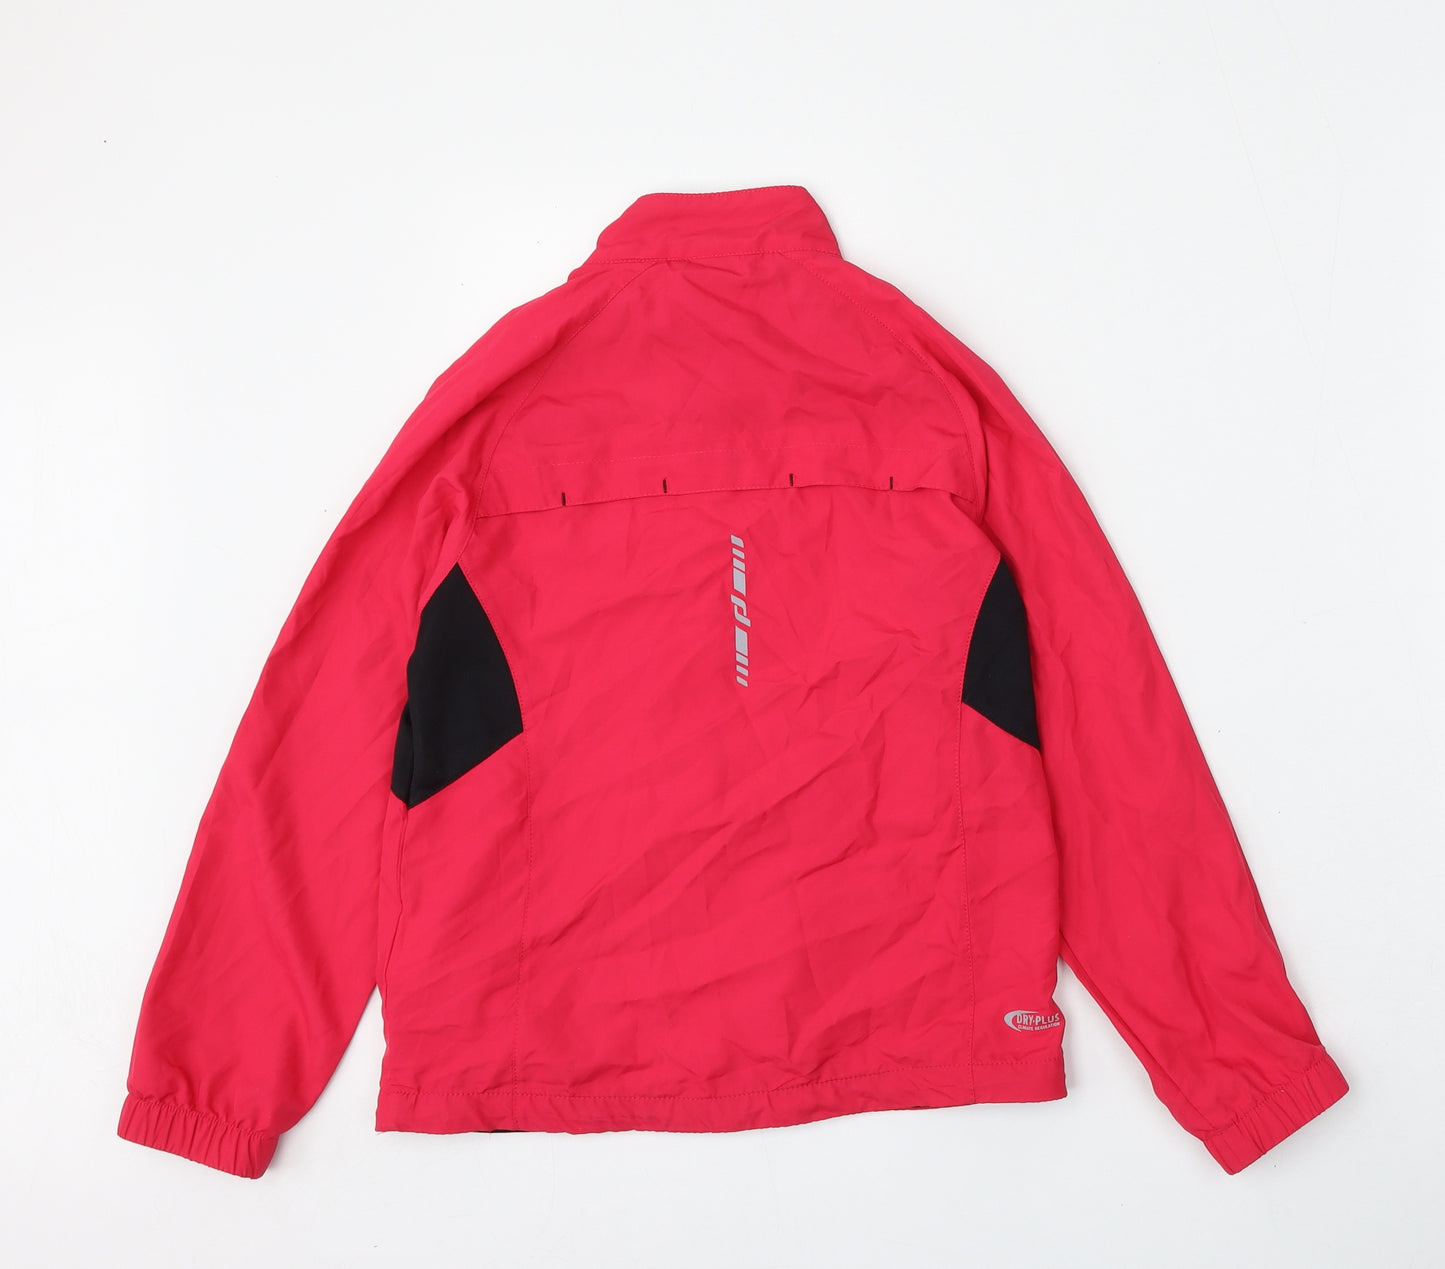 PRO TOUCH Girls Pink   Jacket  Size 8 Years  Zip